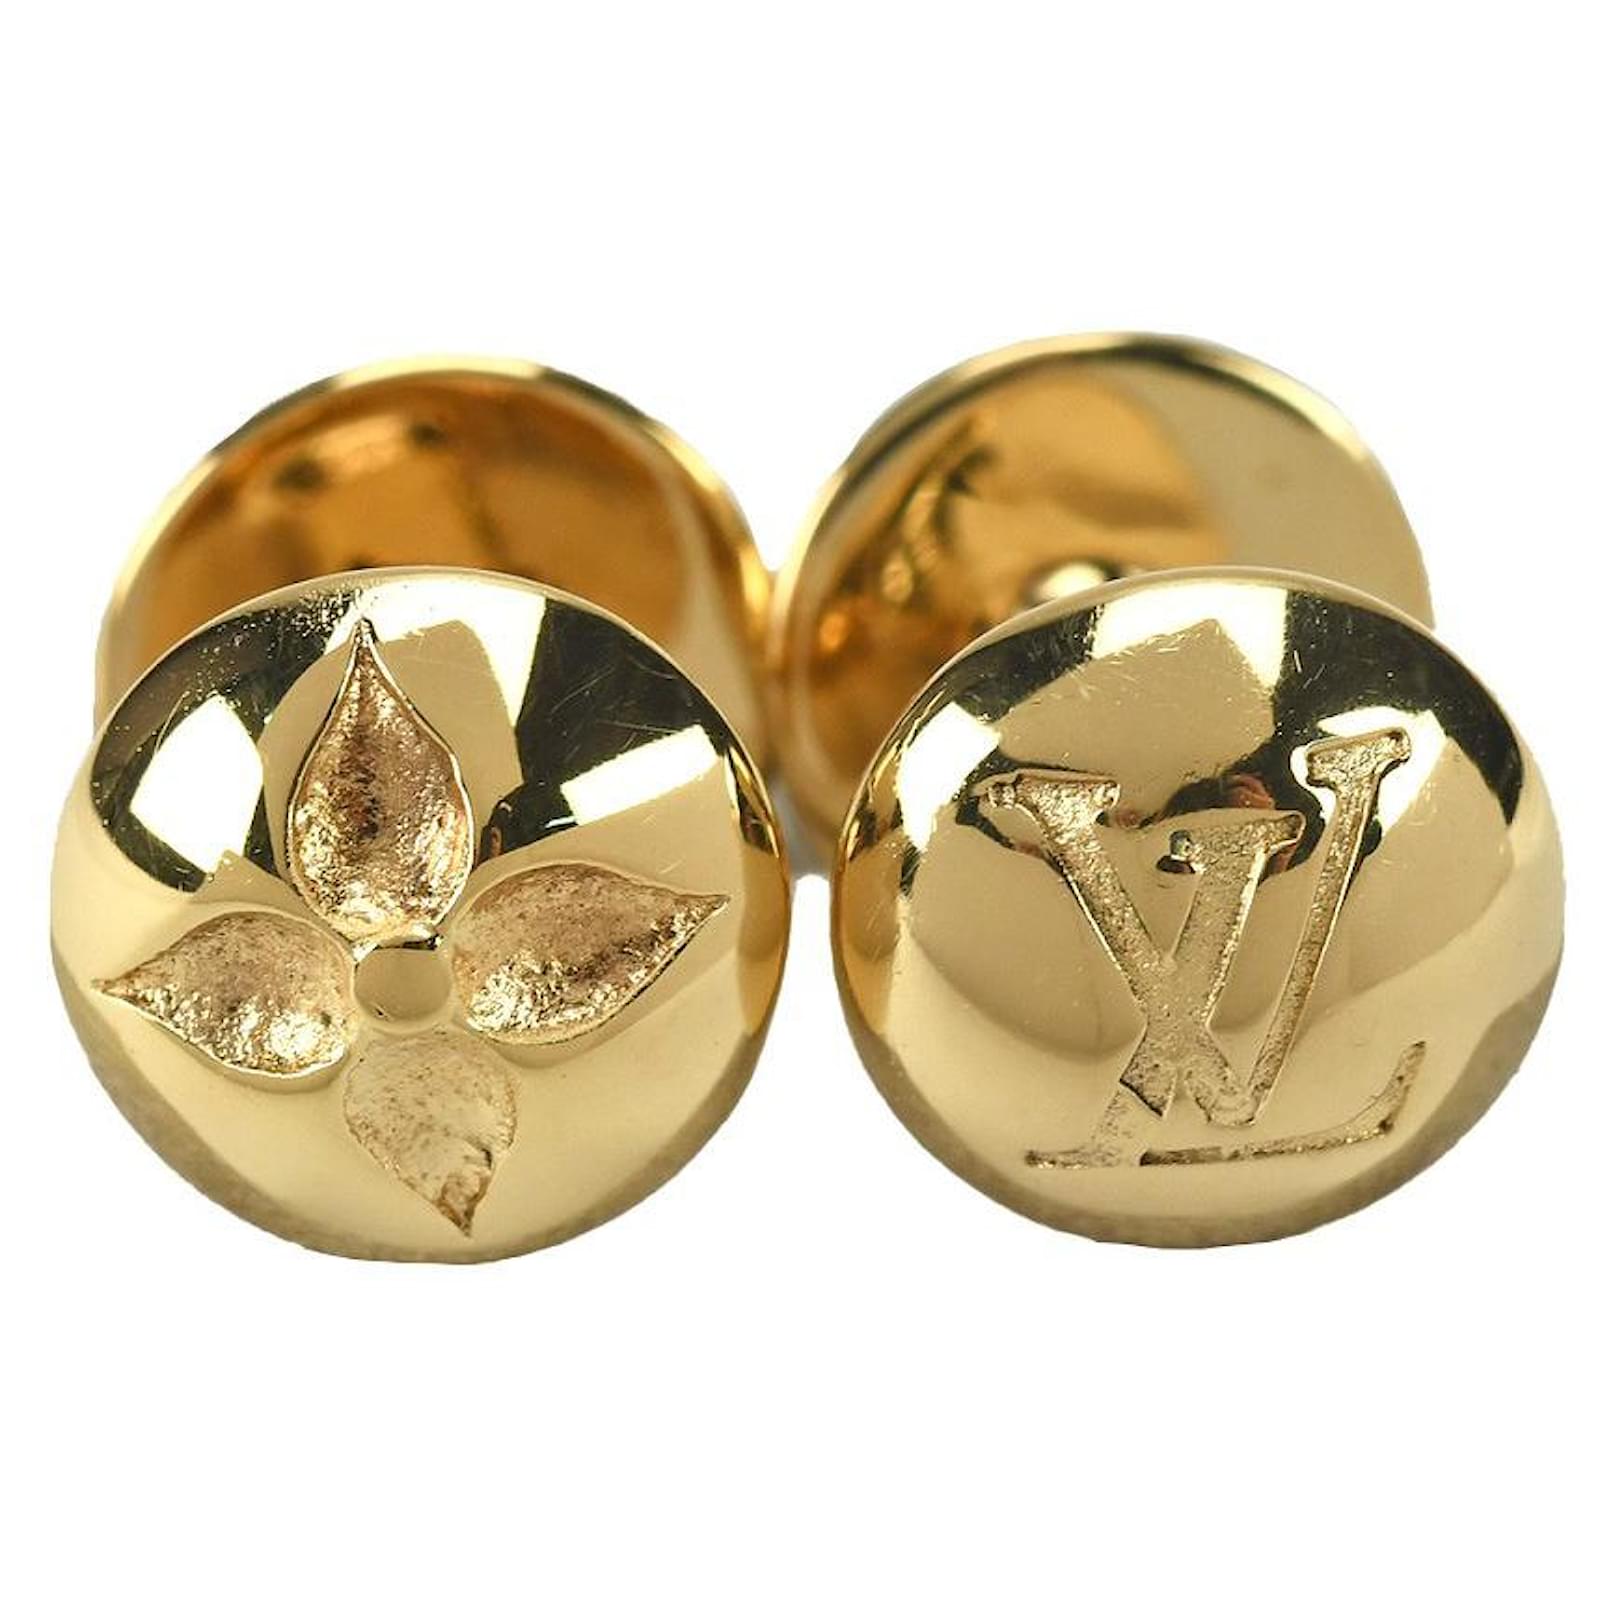 Louis Vuitton Cuff Links – The 2S Co